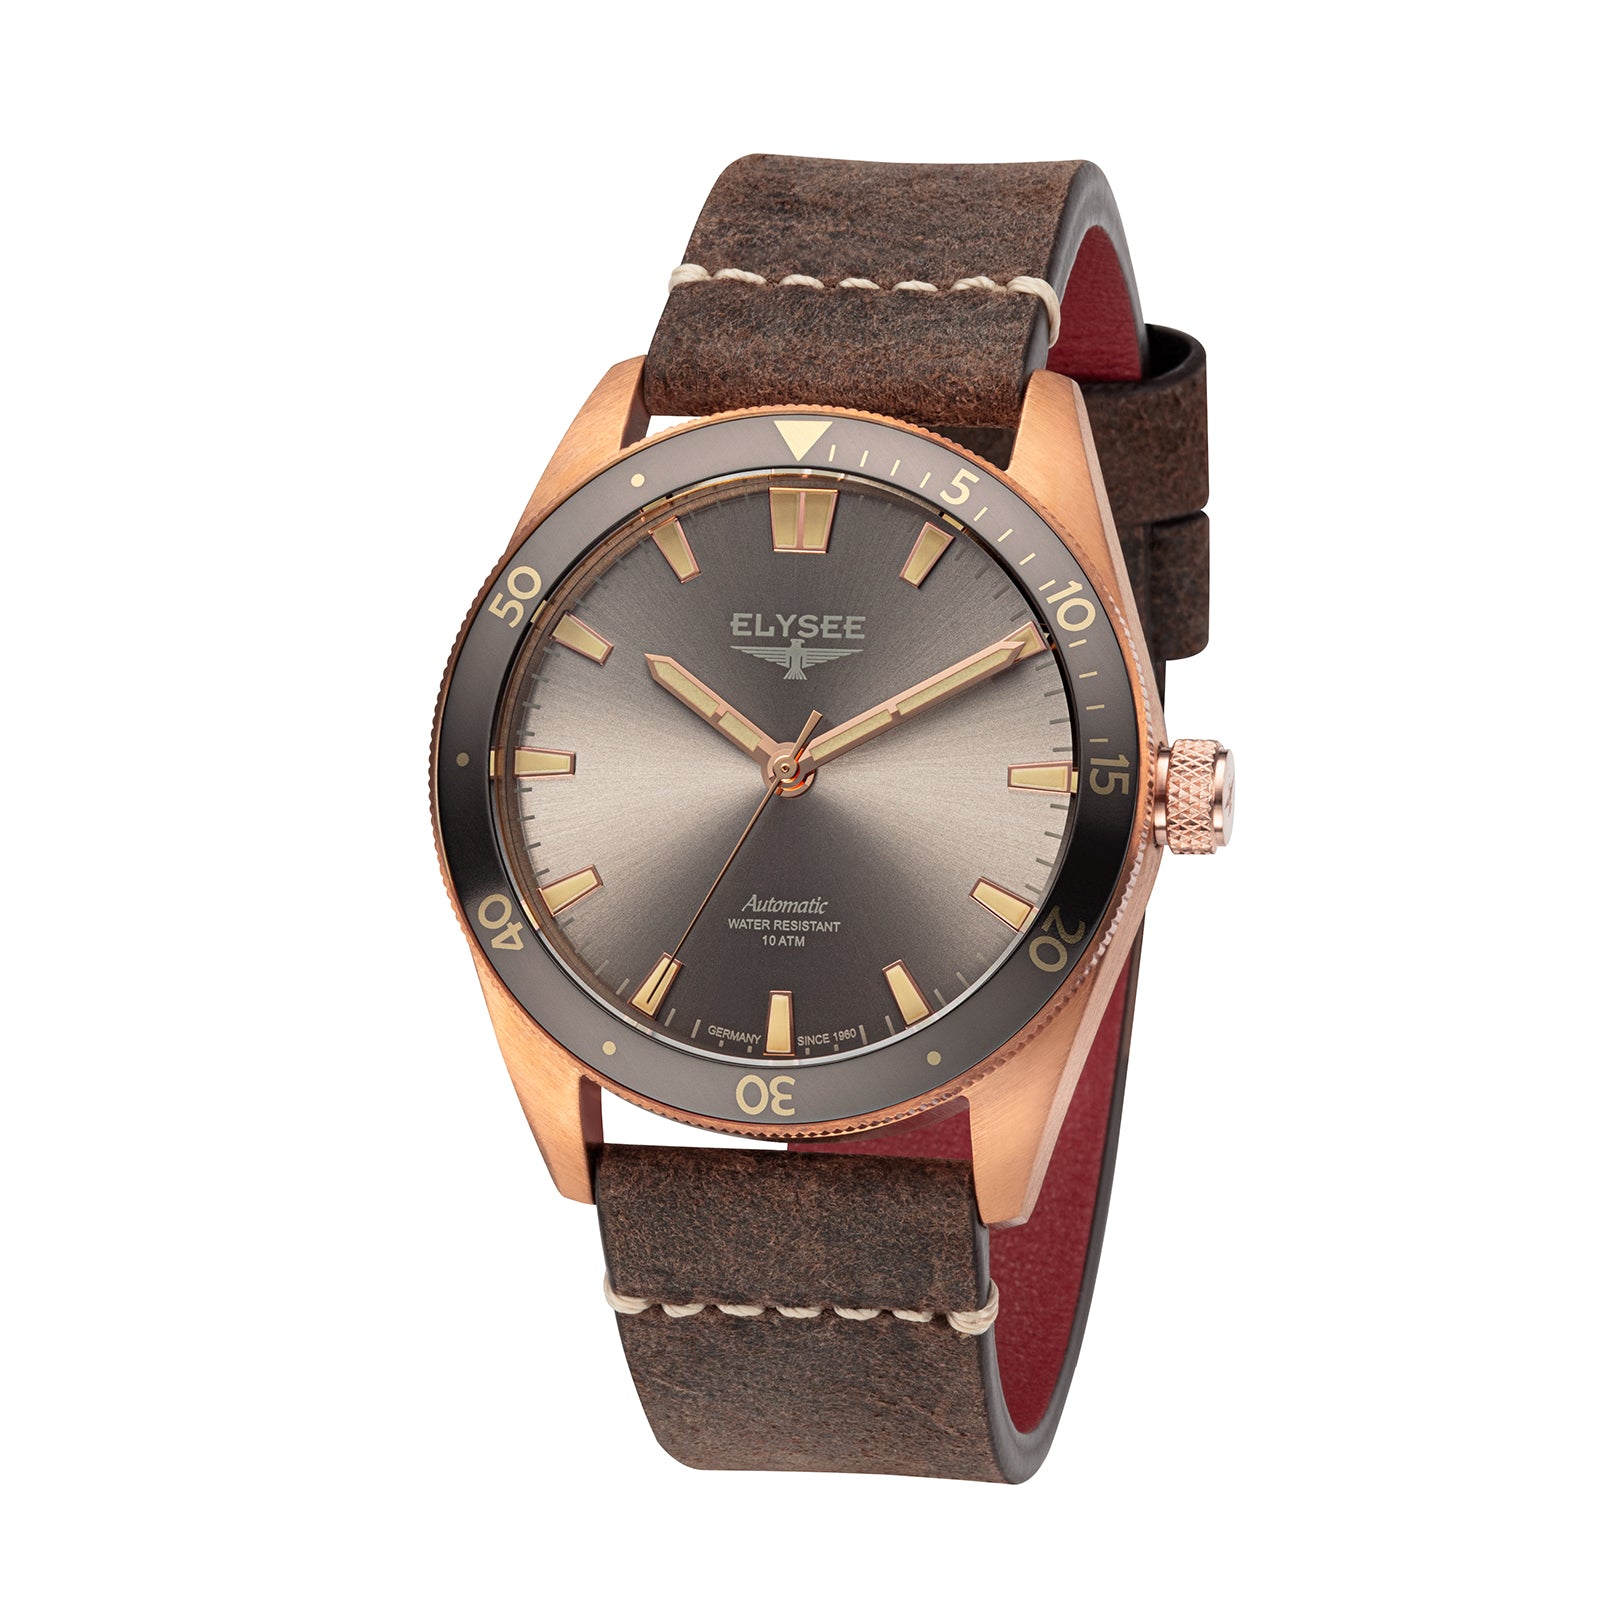 Bronze Automatic - 98022 Elysee - - Elysee – Uhren Watches automatic watch